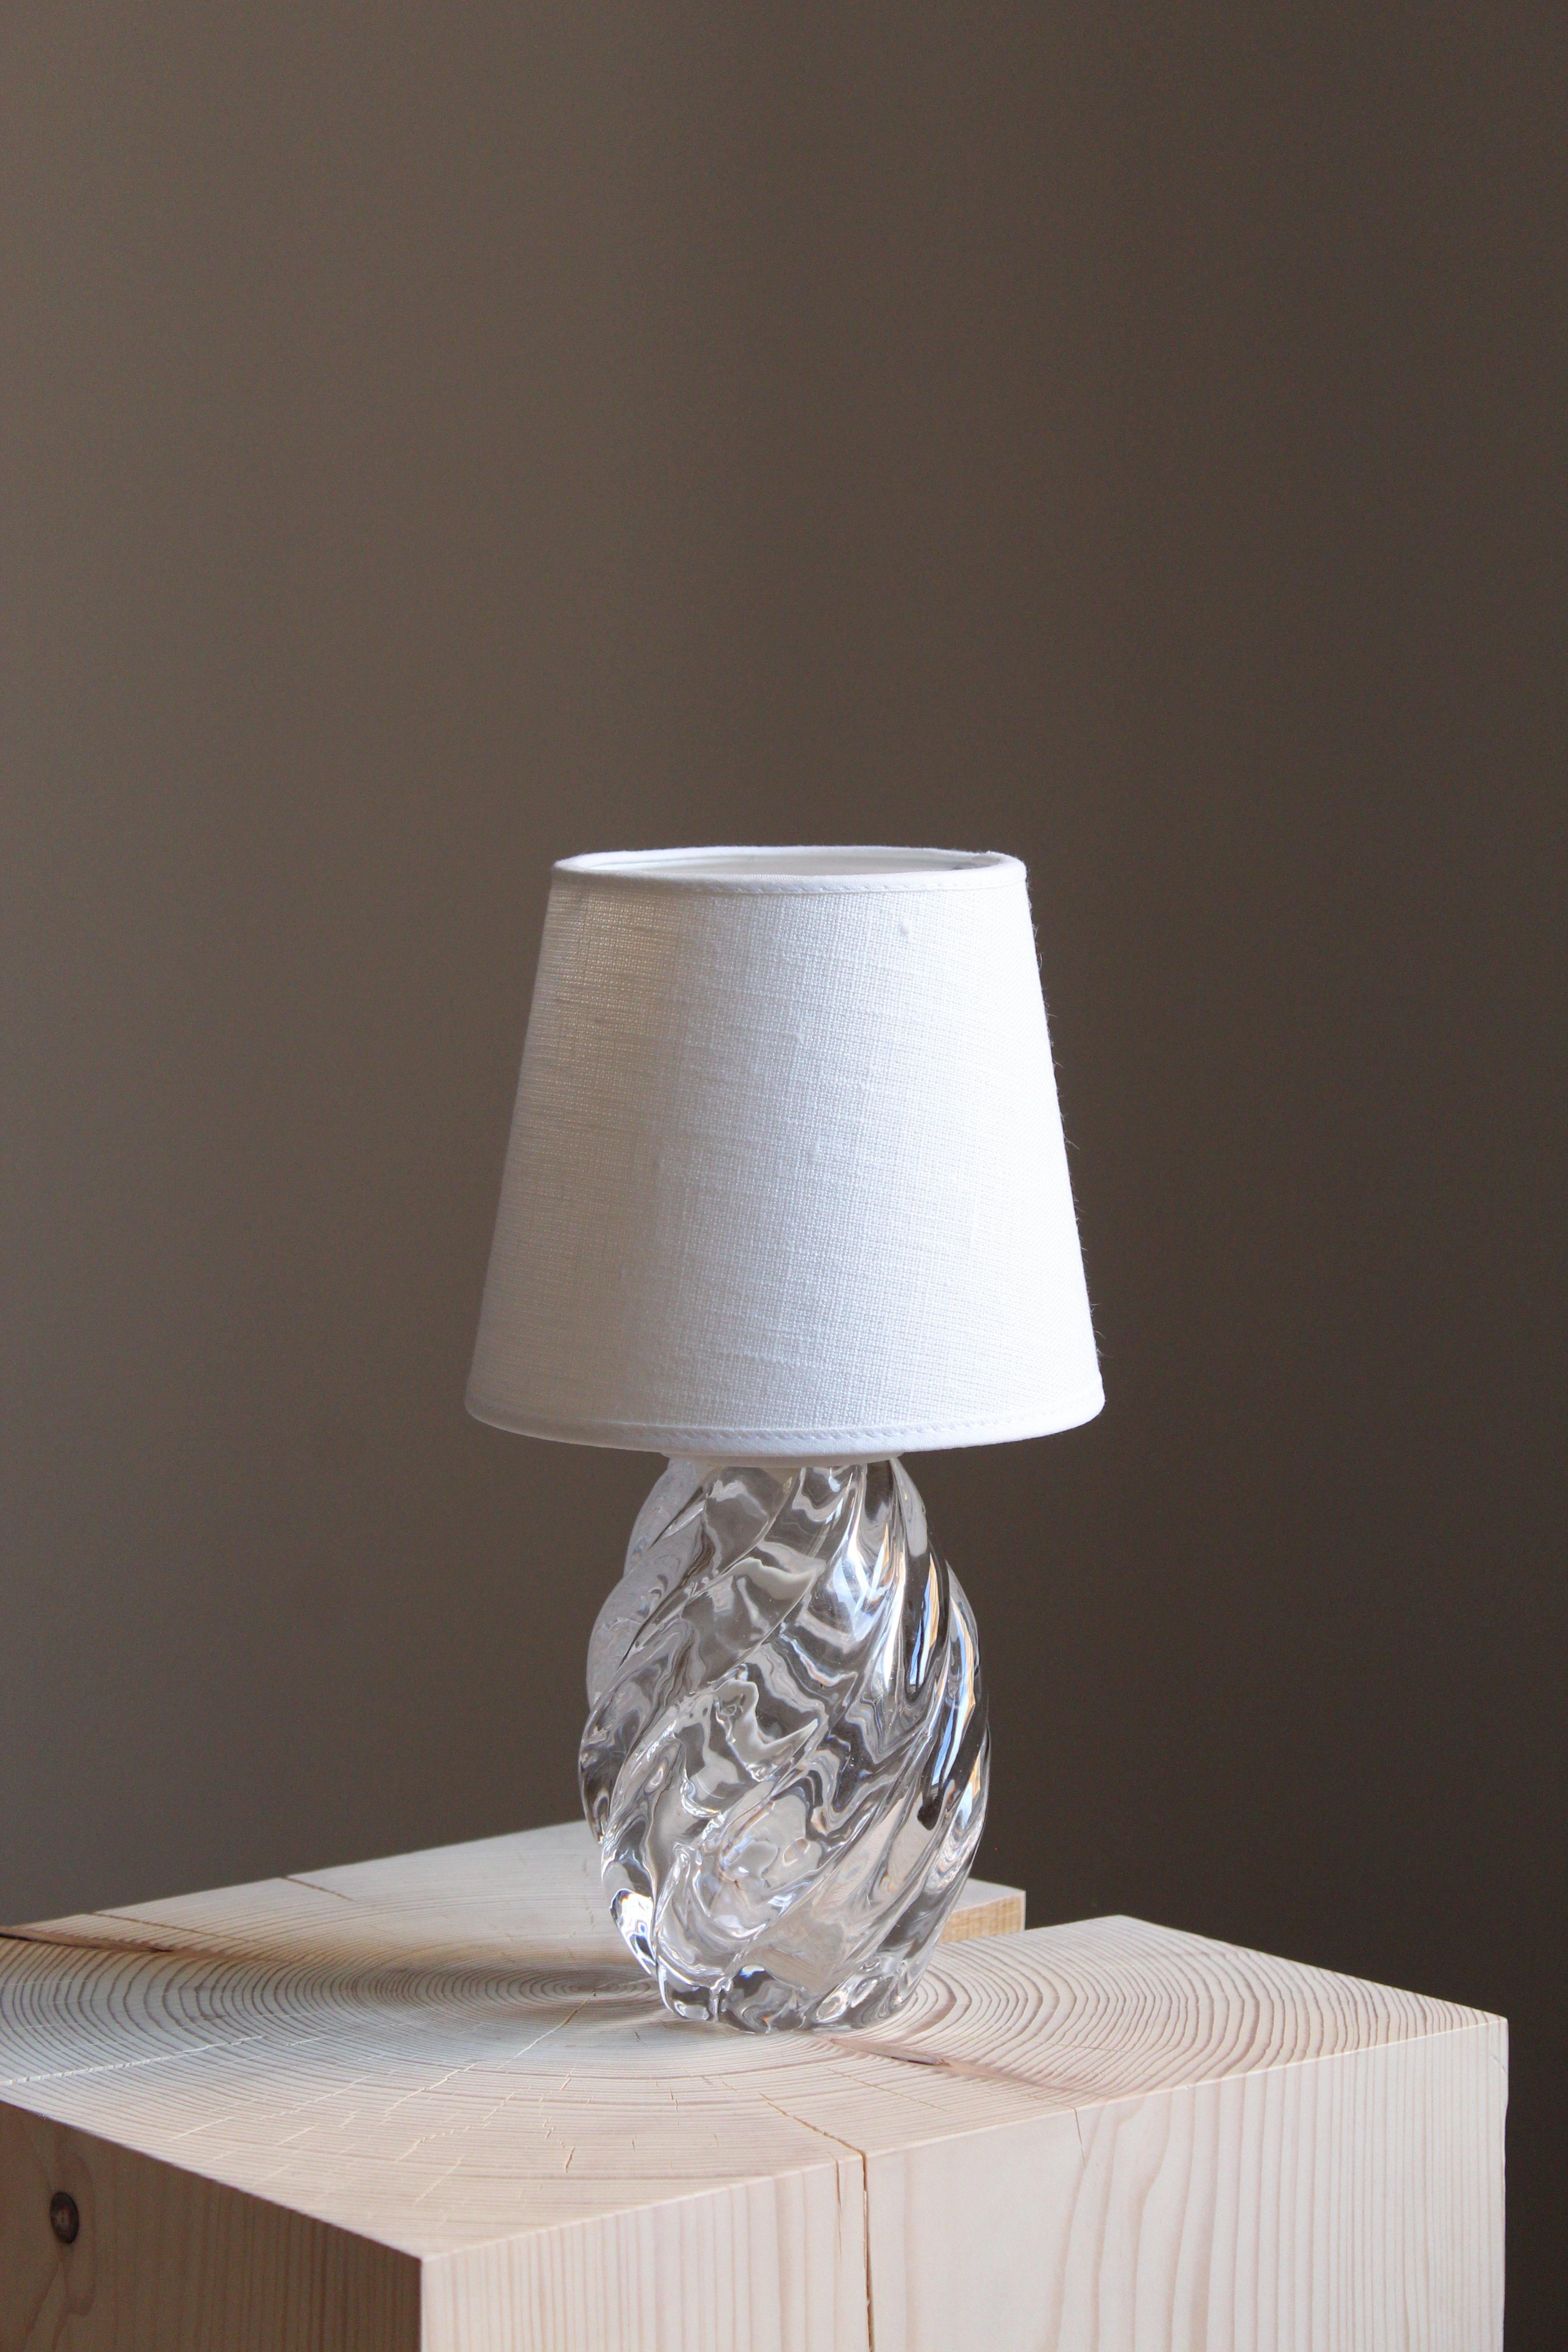 A modernist organic table lamp. Of Swedish production, produced by Reijmyre Glasbruk. In blown glass, 1950s.  Sold without lampshade.

Other designers of the period include Paavo Tynell, Josef Frank, Lisa Johansson-Pape, and Alvar Aalto.